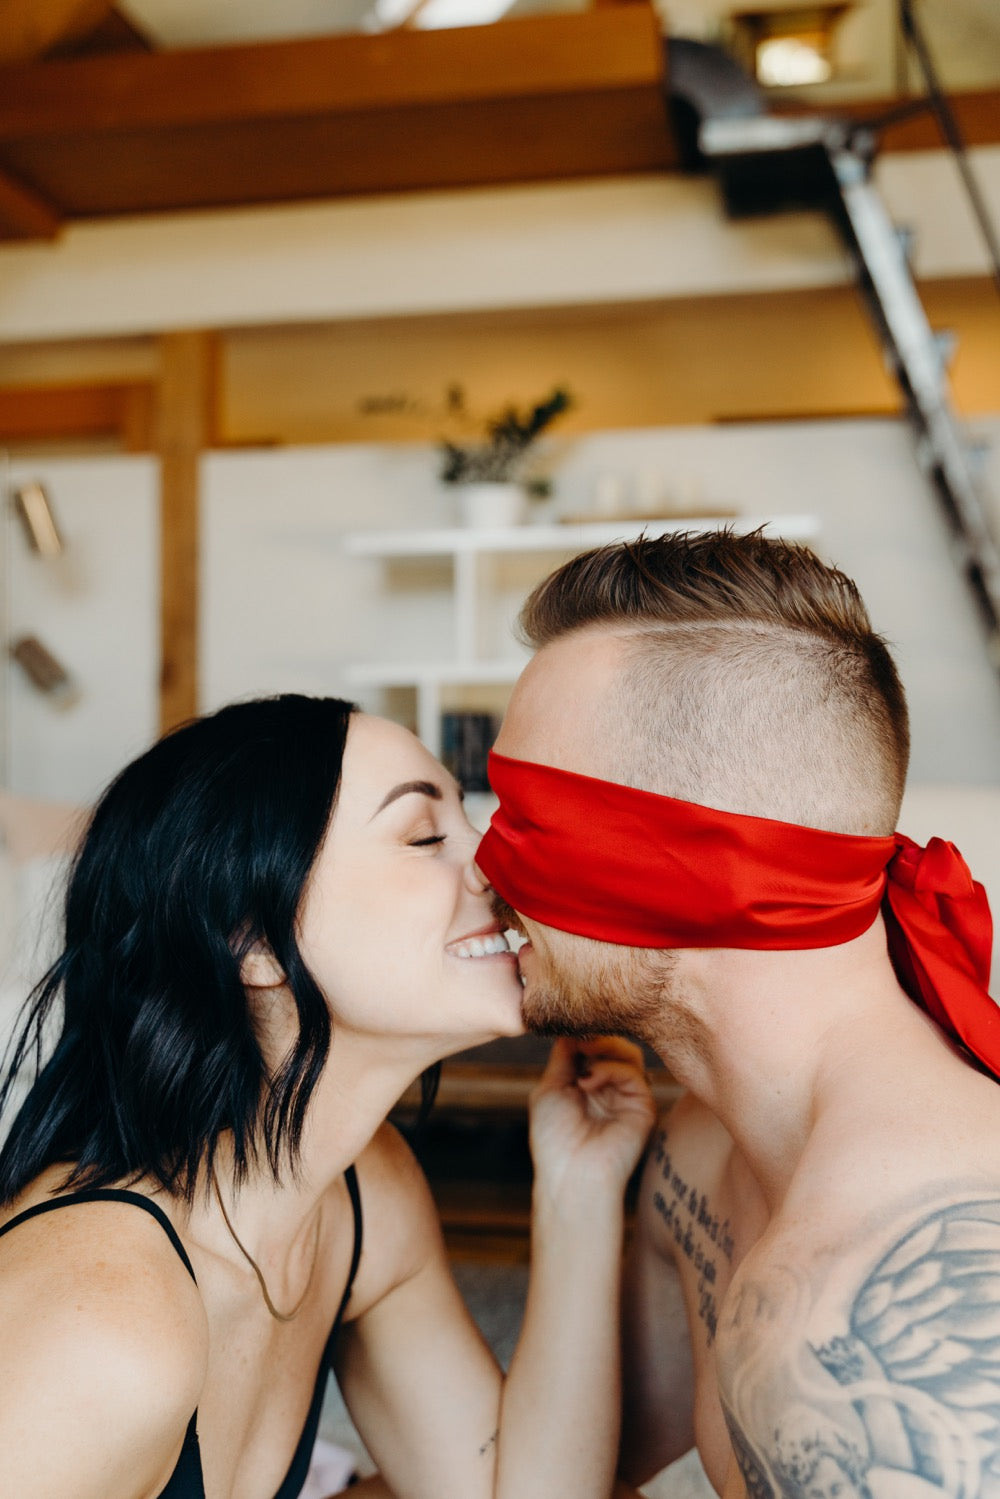 The 15 Best Sex Games for Couples to Spice Up the Romance: Couple smiling with the guy wearing a red blindfold